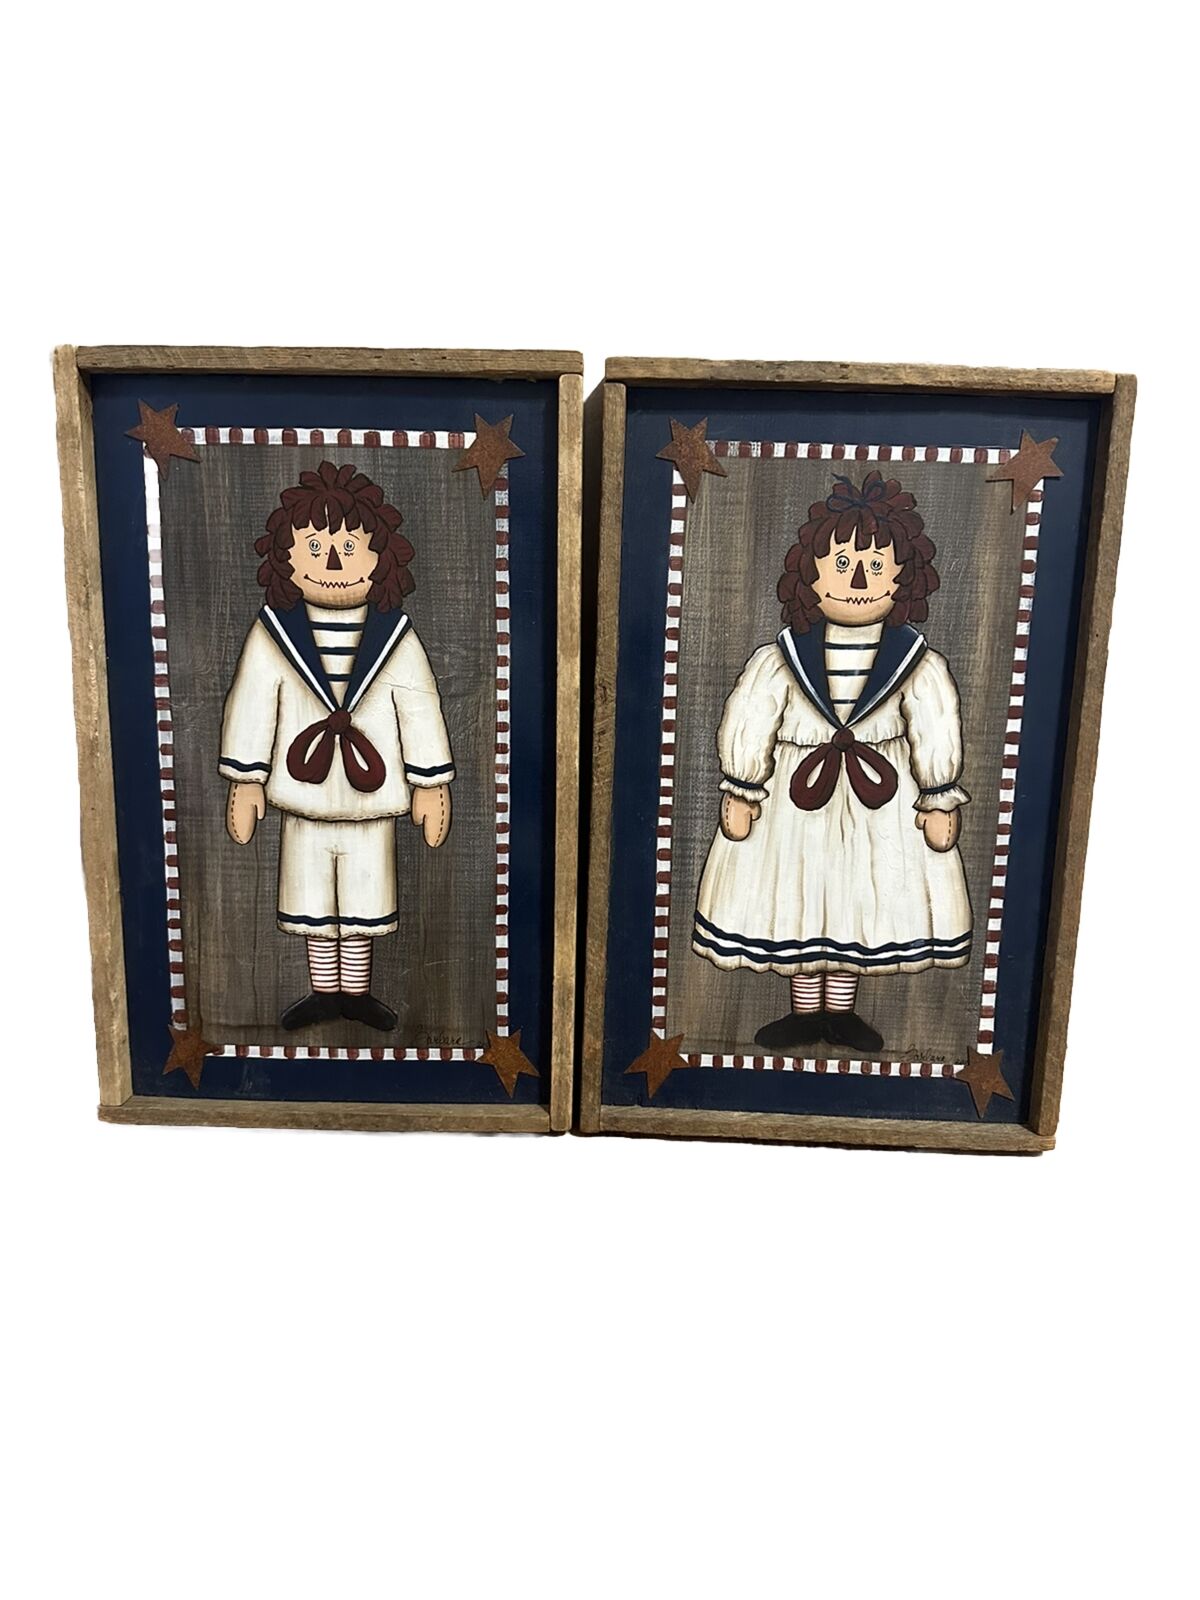 Raggedy Andy And Ragedy Ann Wooden Framed Painted Wall Decor